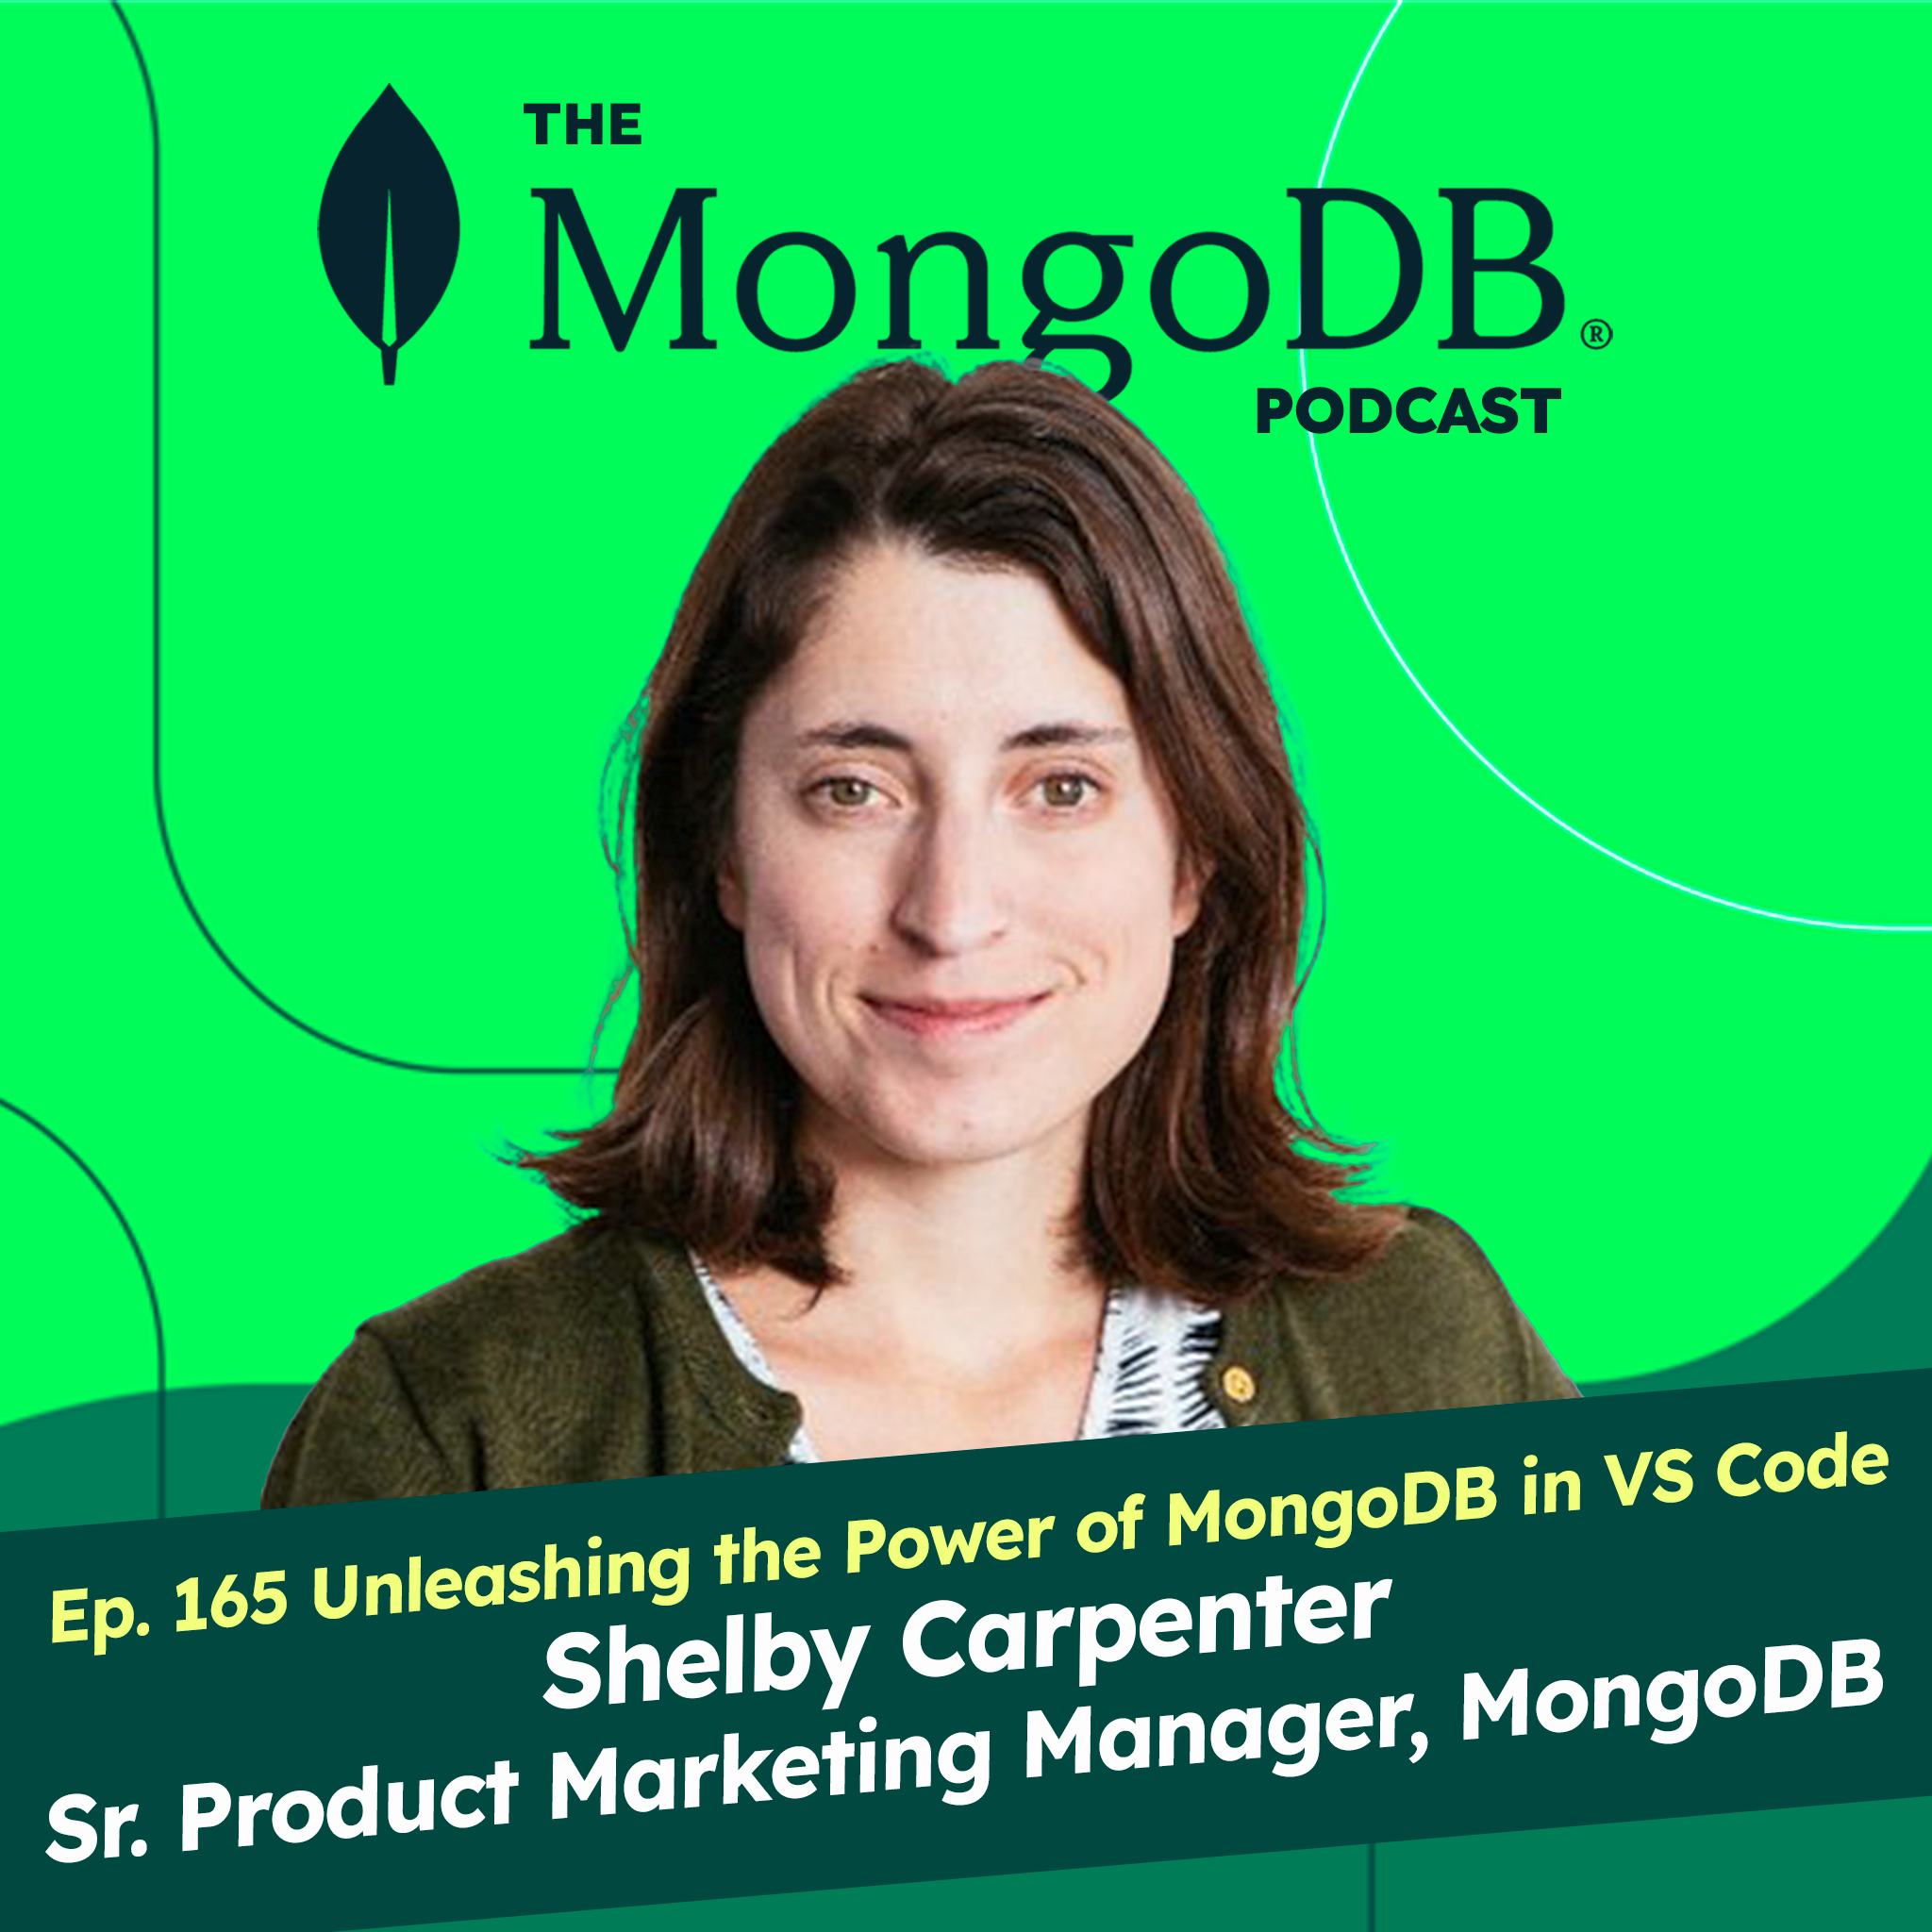 Ep. 165 Unleashing the Power of MongoDB in VS Code: A Conversation with Shelby Carpenter